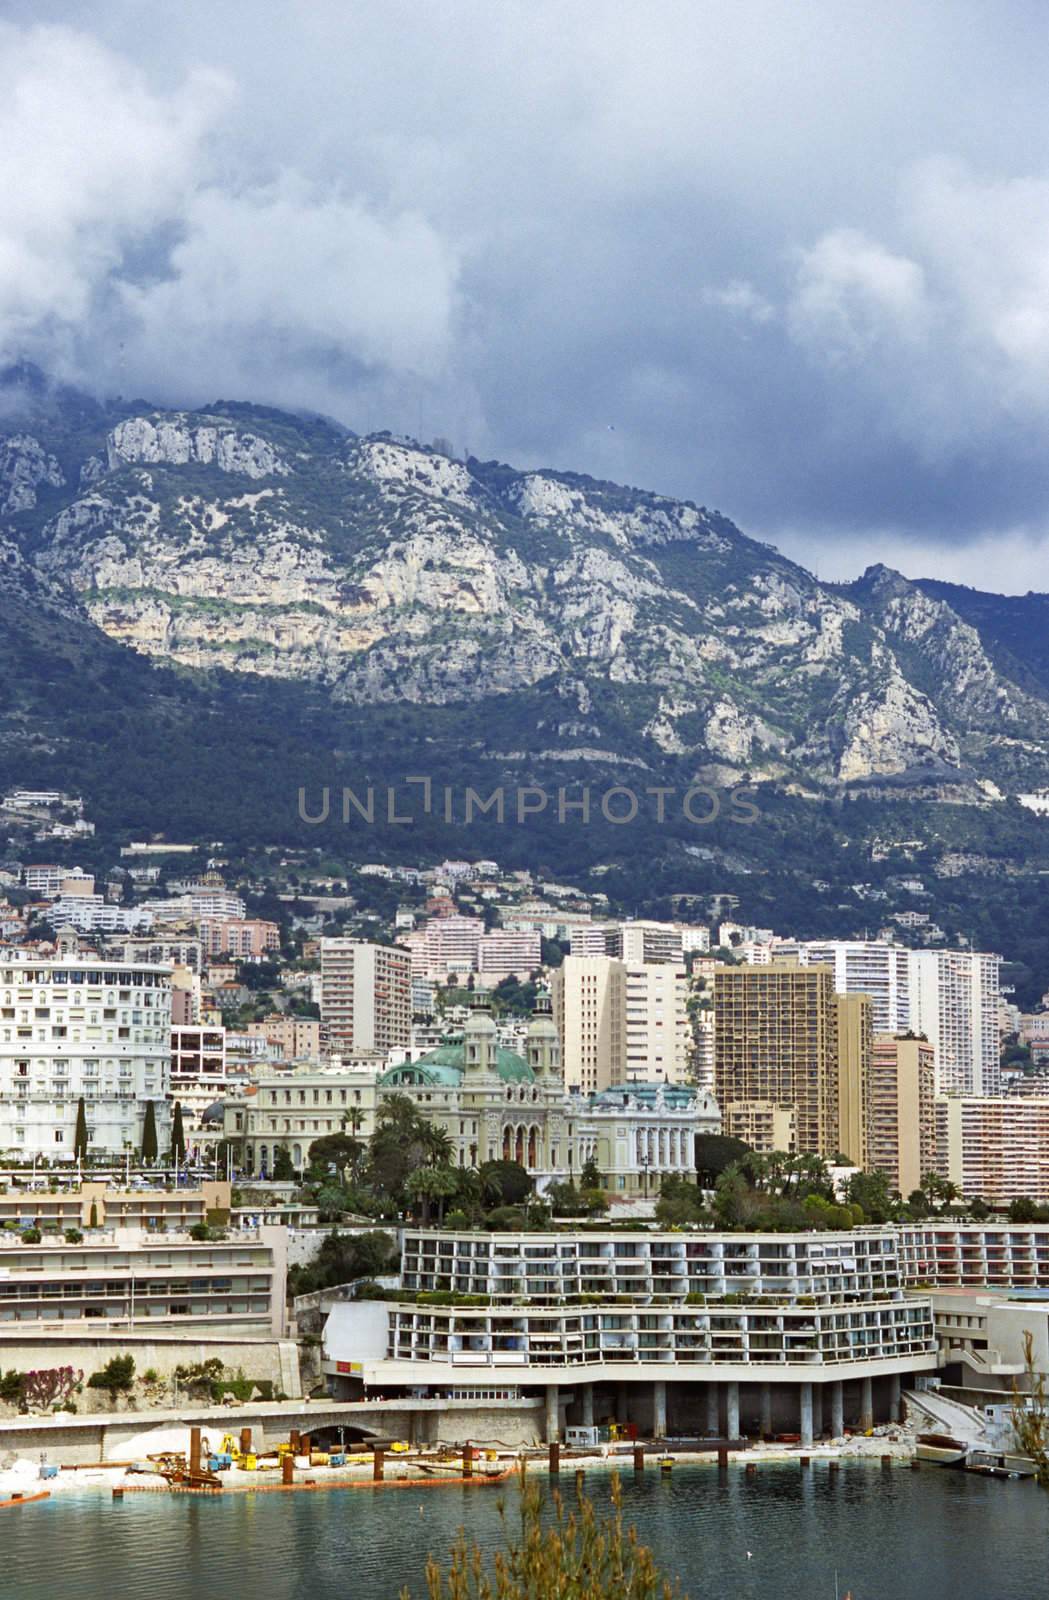 Storm clouds hover over MOnaco, home of the Monaco Grand Prix and the Monte Carlo Casino visible in the background.